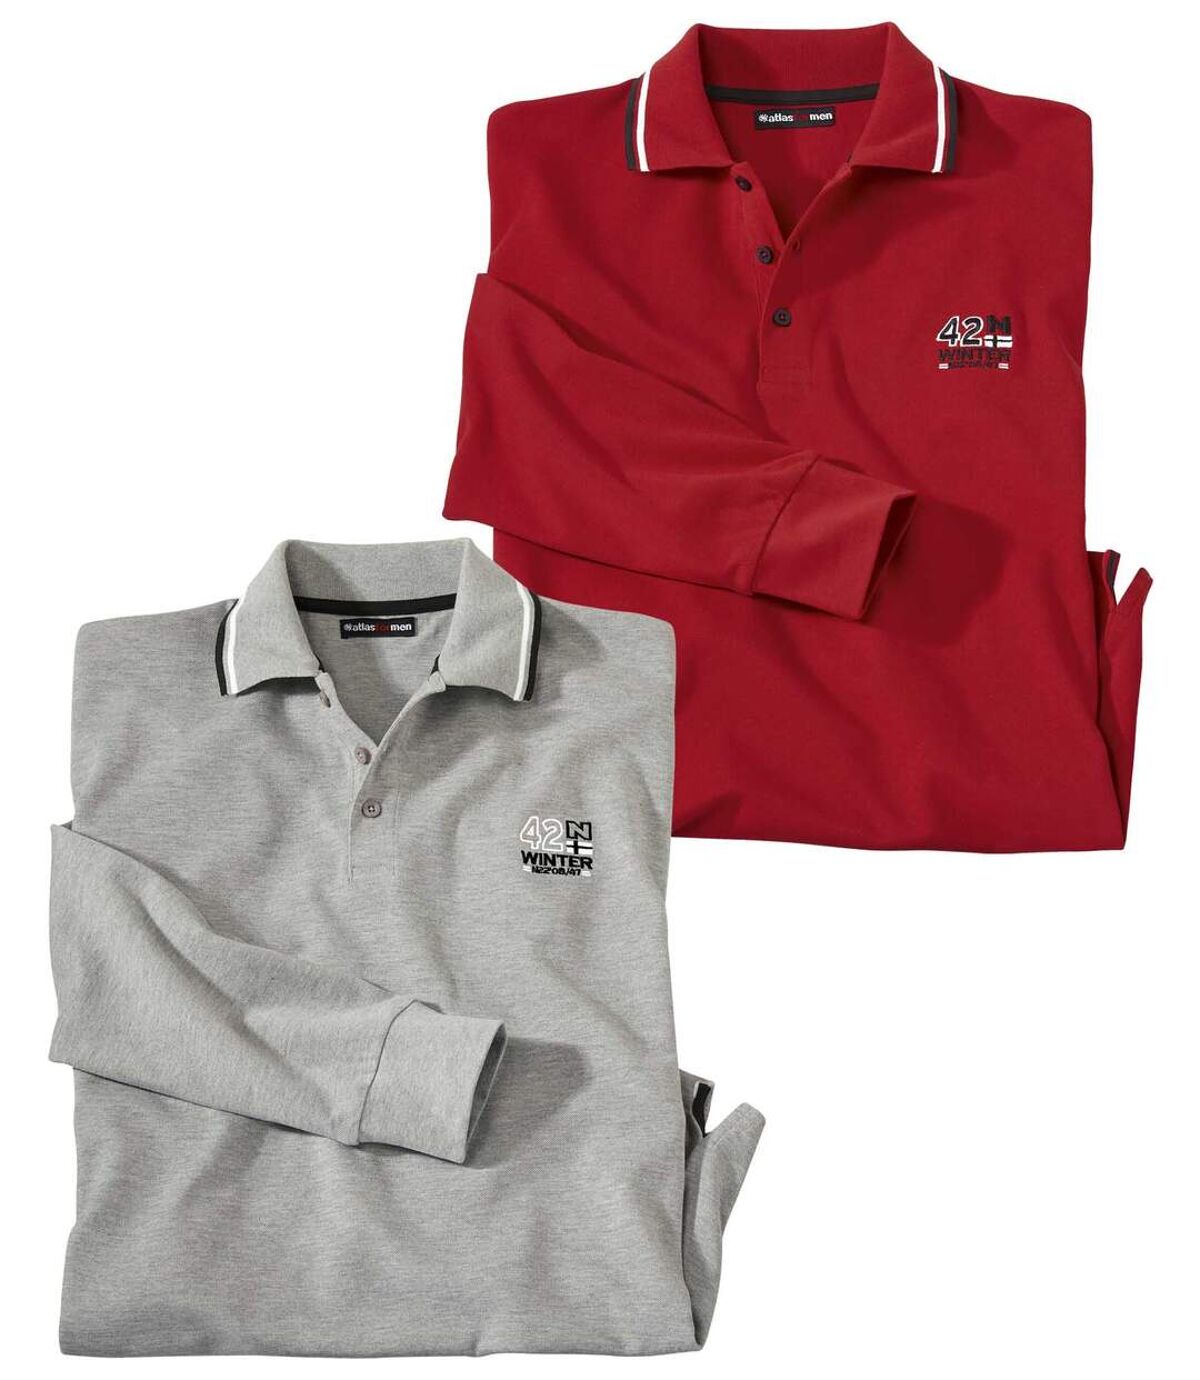 Pack of 2 Men's Grey & Red Polo Shirts - Long-Sleeved Atlas For Men